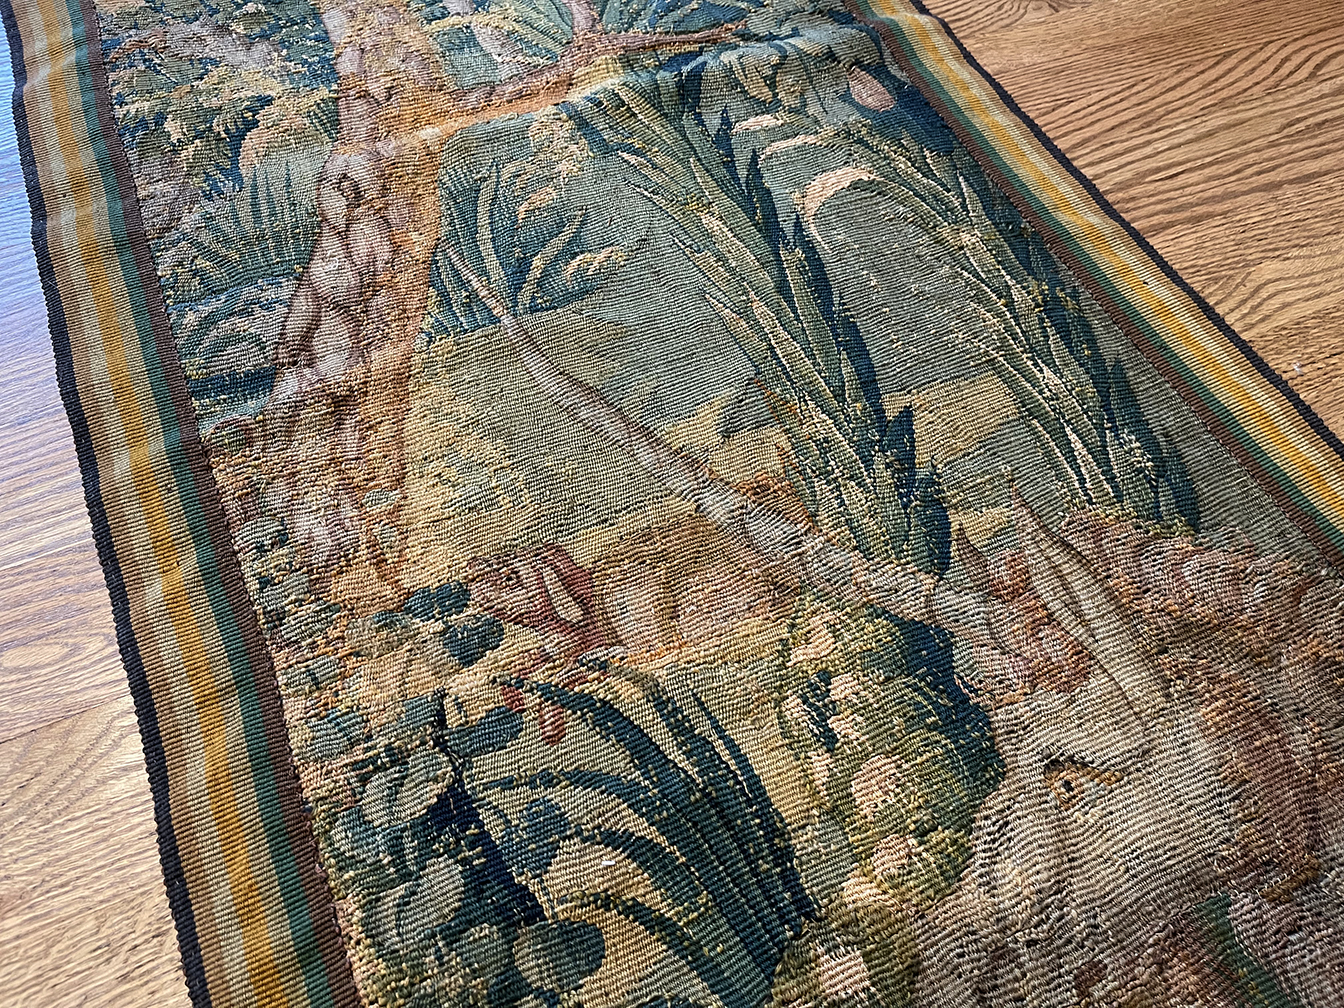 Antique tapestry - # 56841